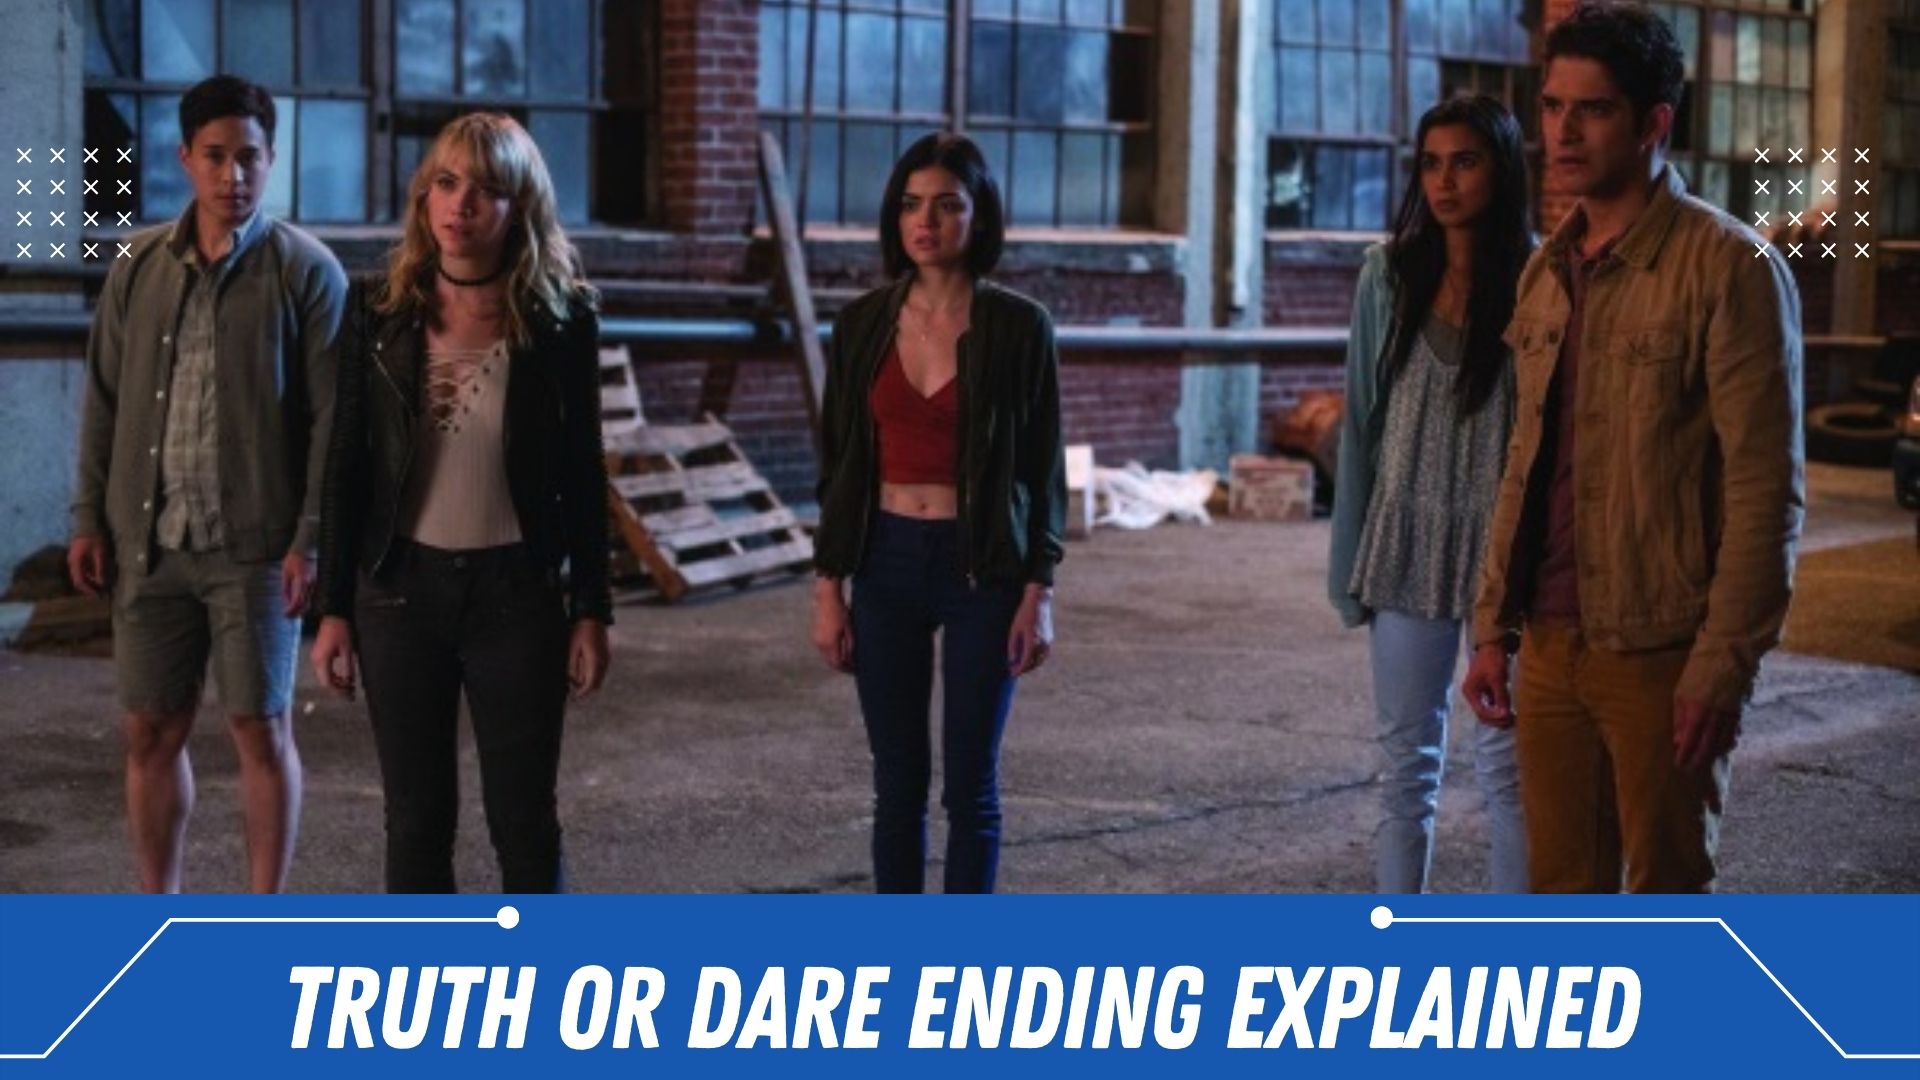 truth or dare ending explained